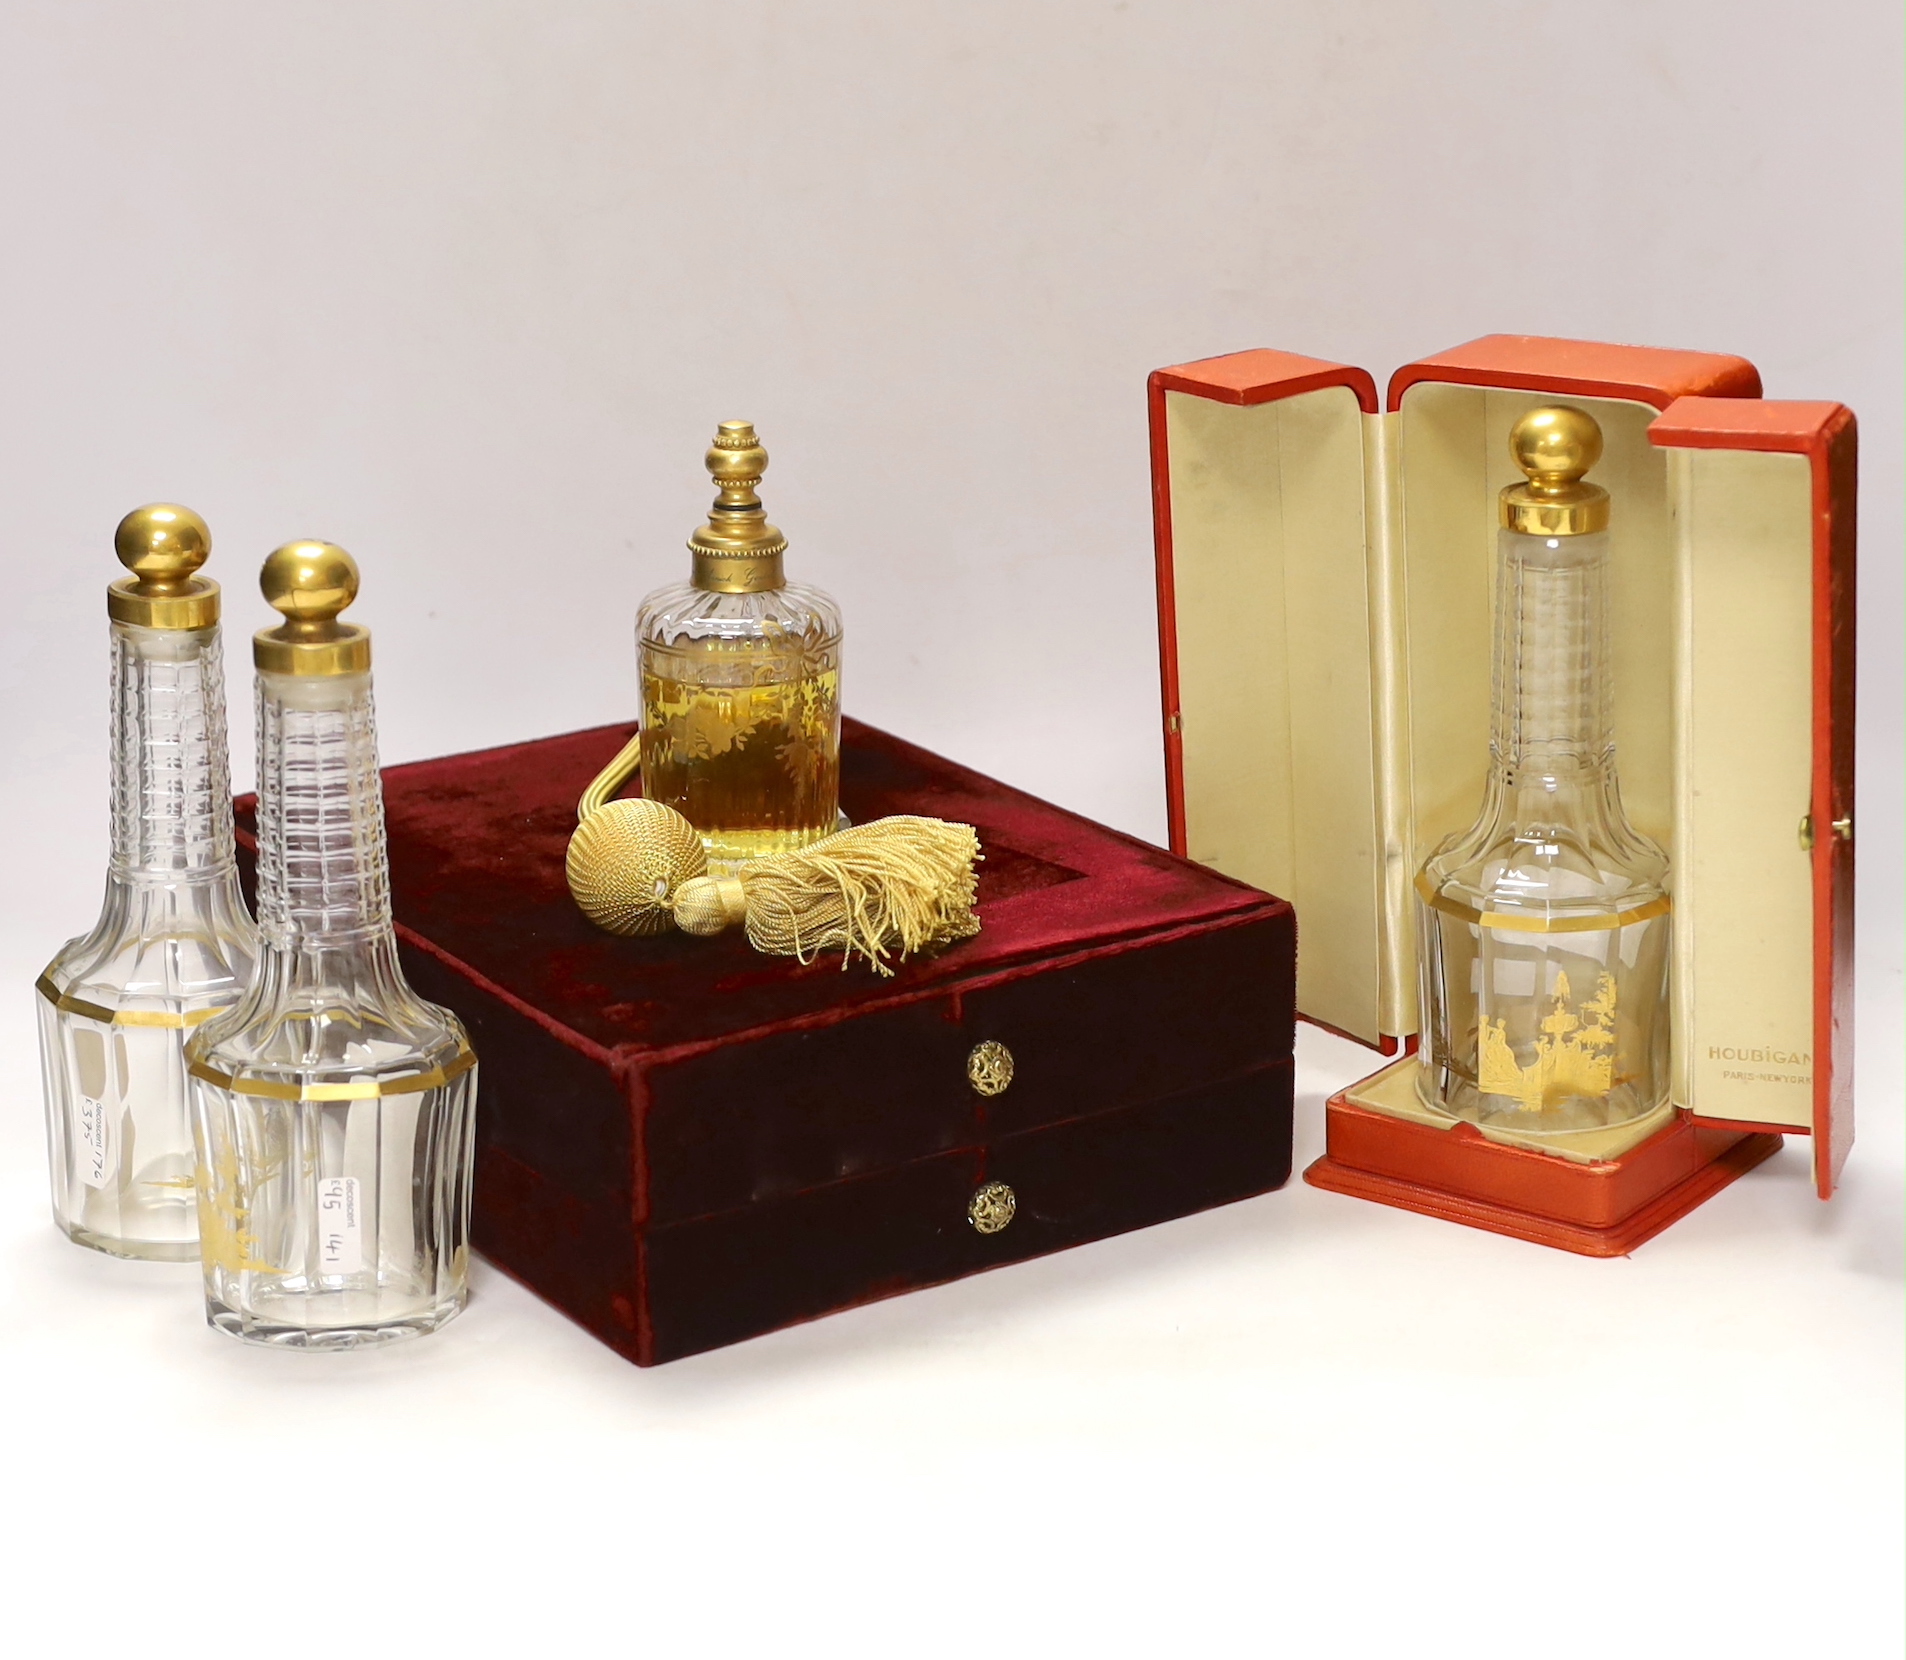 An Annick Gontal, Paris Baccarat perfume atomiser, boxed, together with three Houbigant perfume gilt decorated Baccarat bottles, one with two door peach leather case, tallest Houbigan perfume bottle, 20cm high including